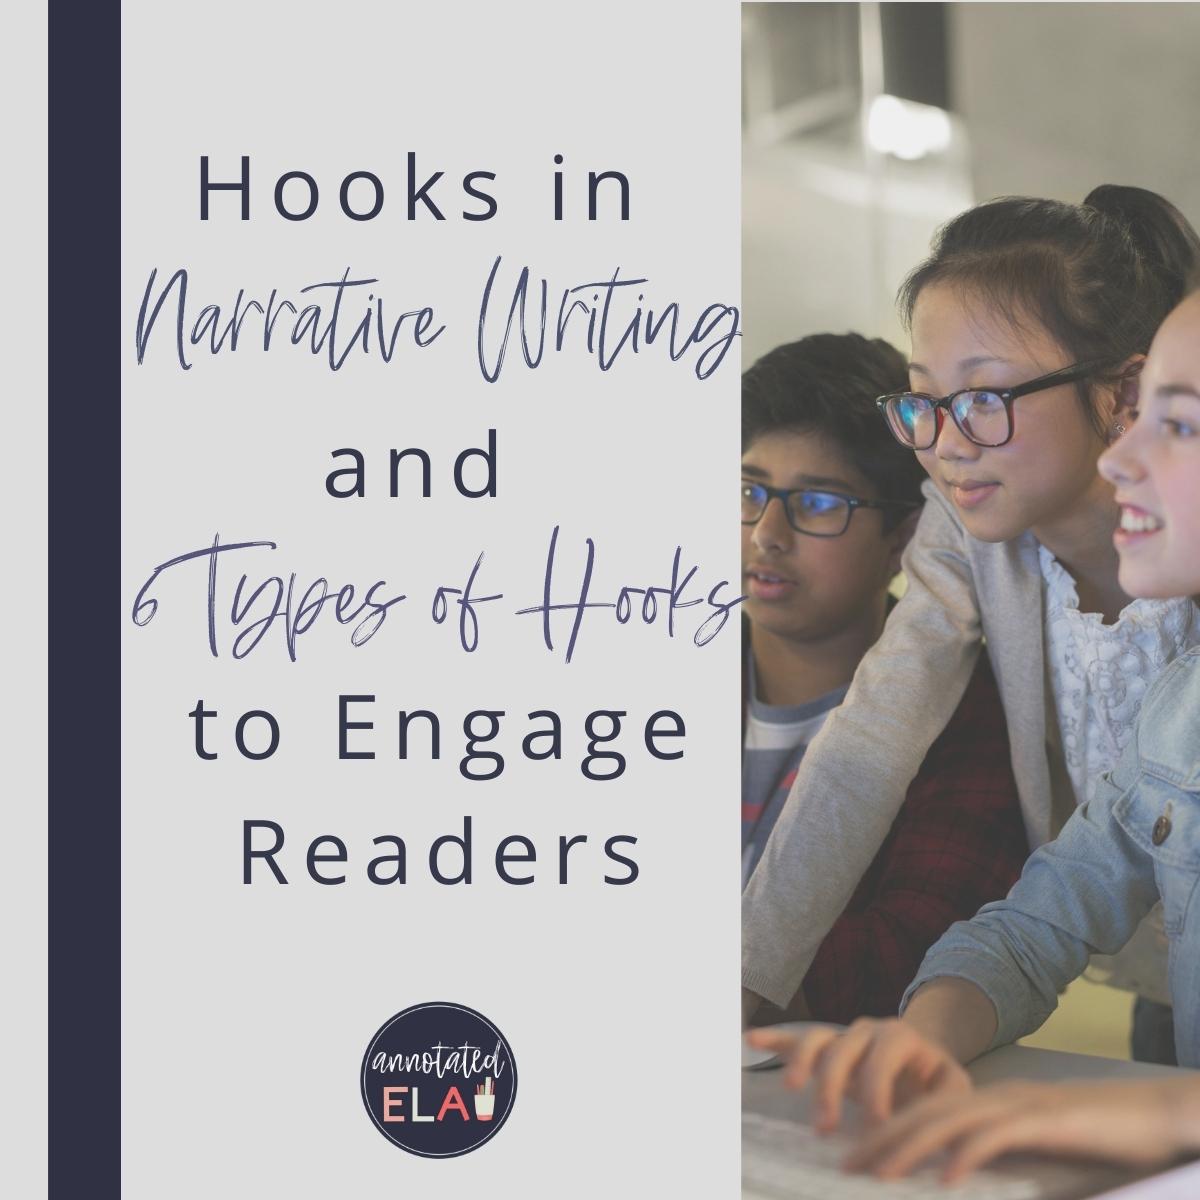 Hooks in Narrative Writing and 6 Types of Hooks to Engage Readers